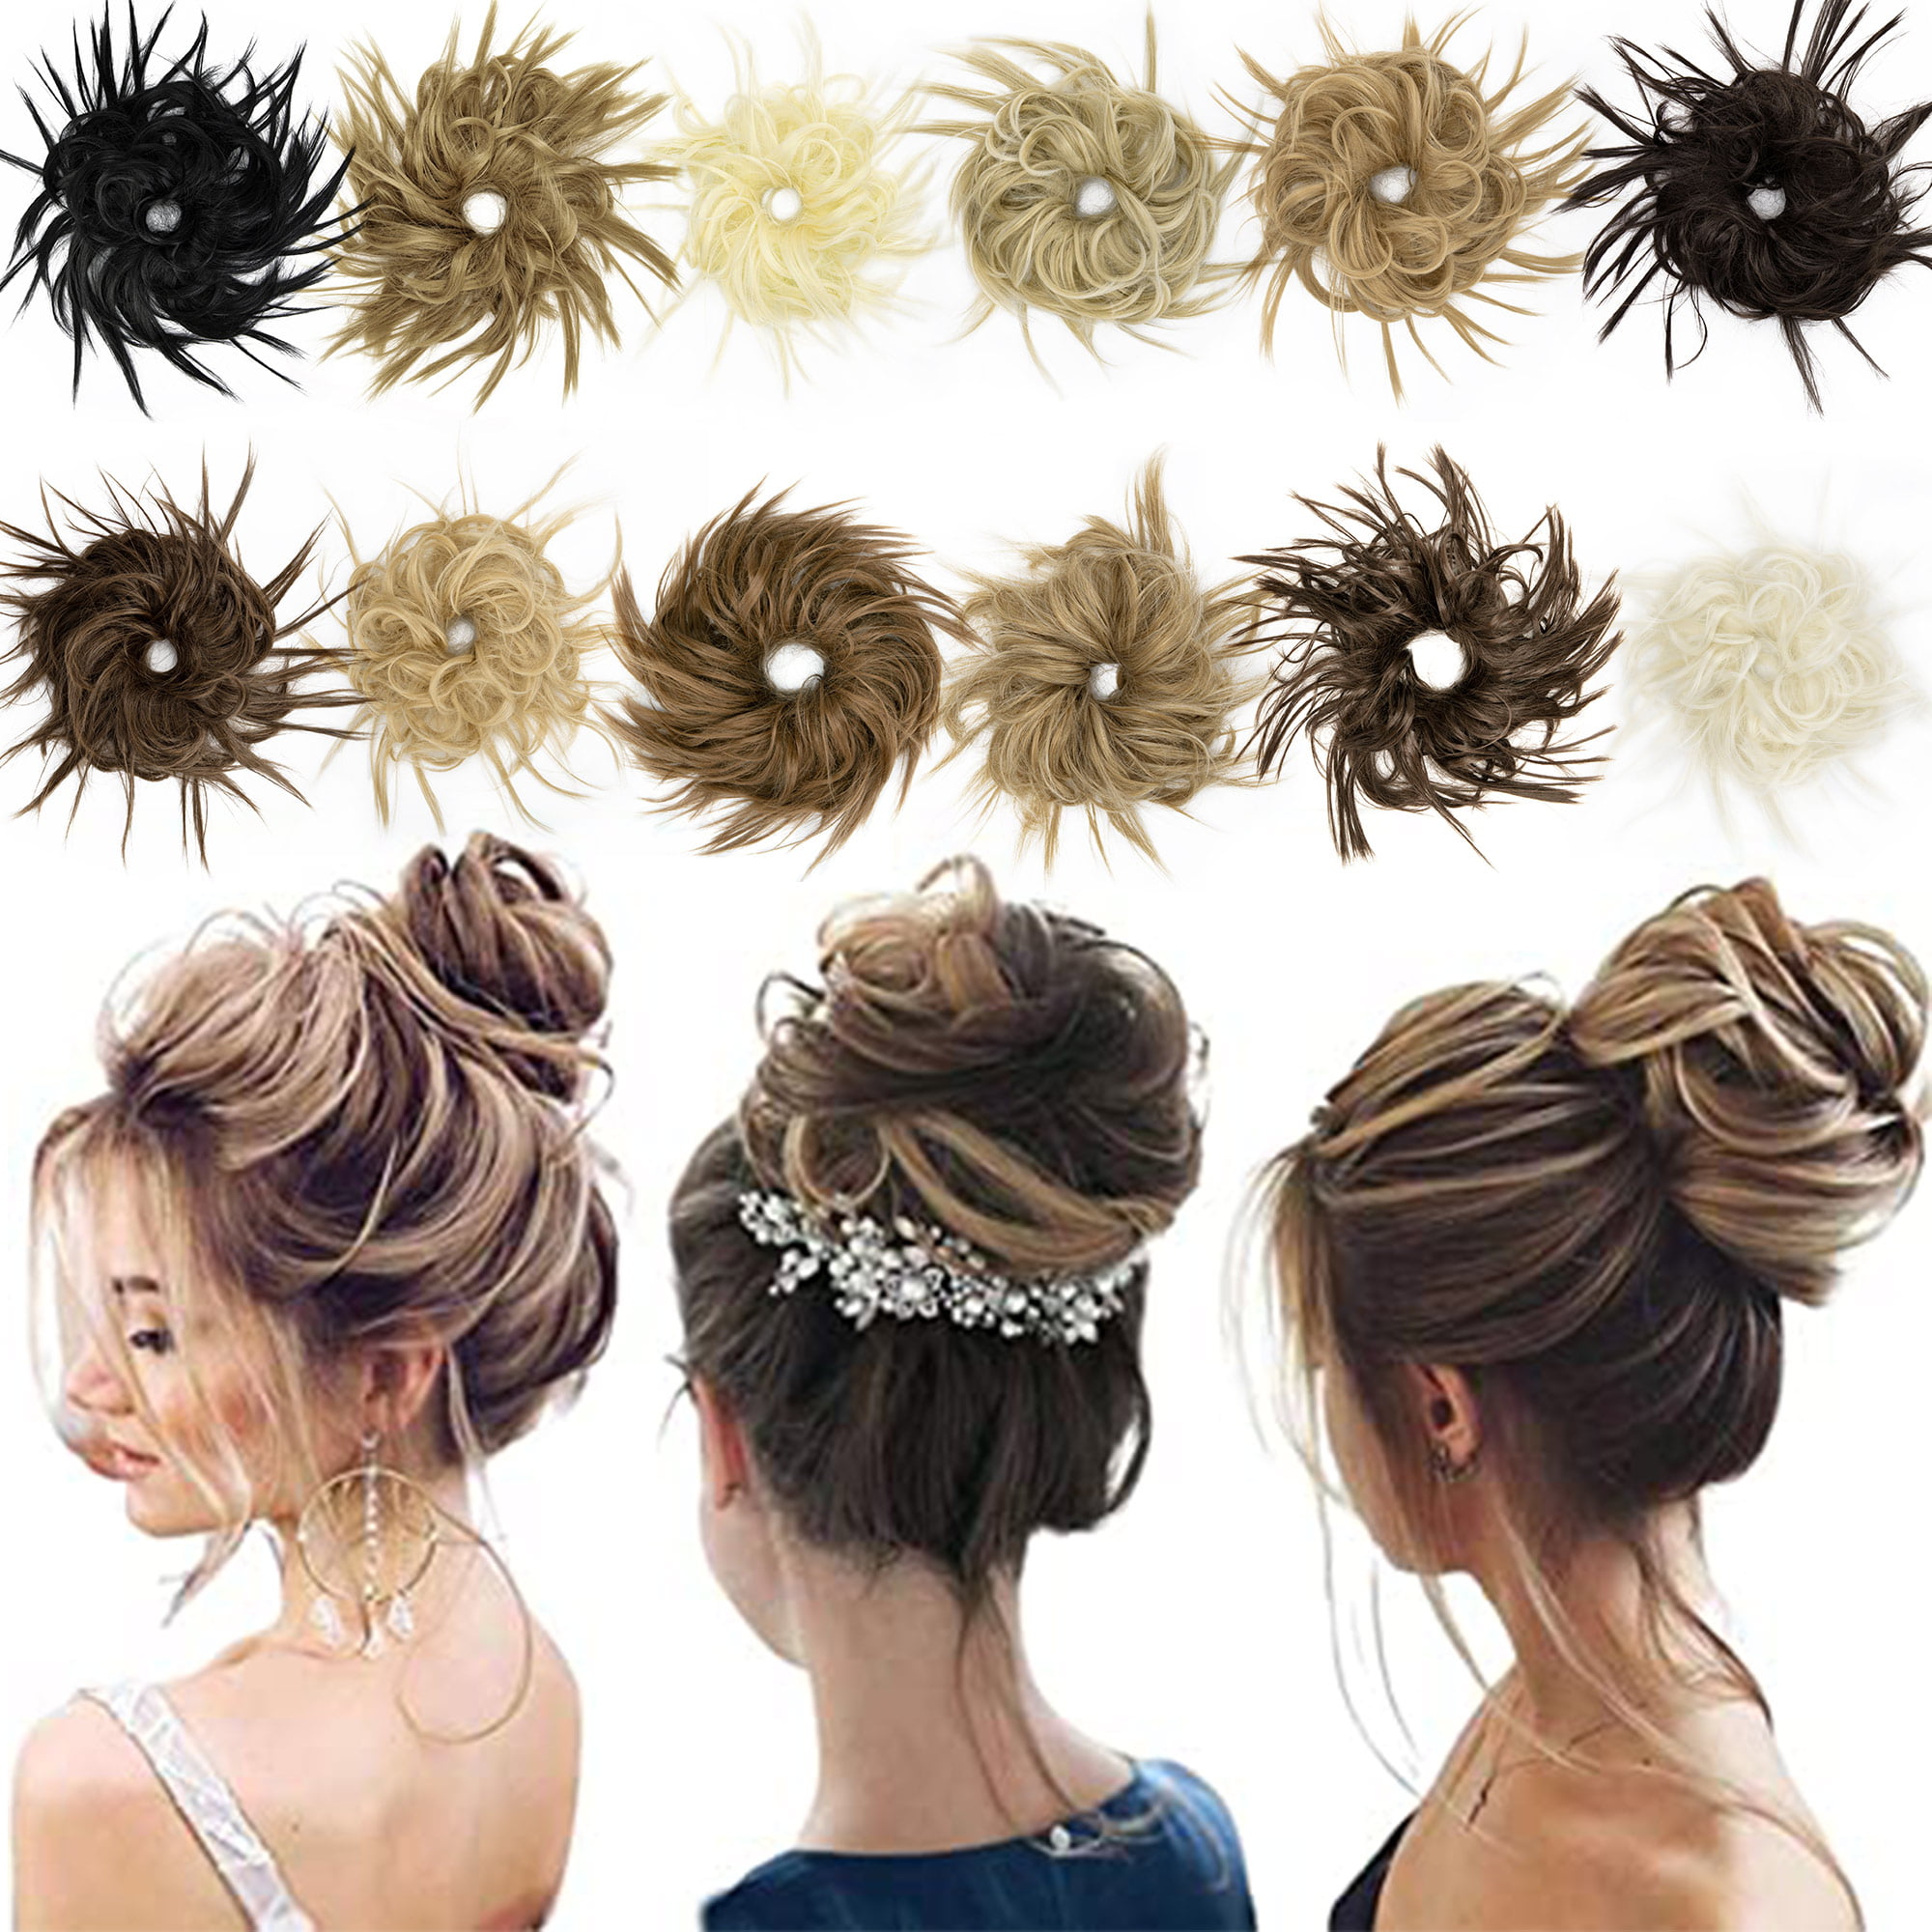 Hair Pieces Extensions Messy Hair Bun Hair Scrunchies Hair Pieces for Women Girls Wavy Curly Ponytail Extensions Donut Chignons Updo Hair Accessories